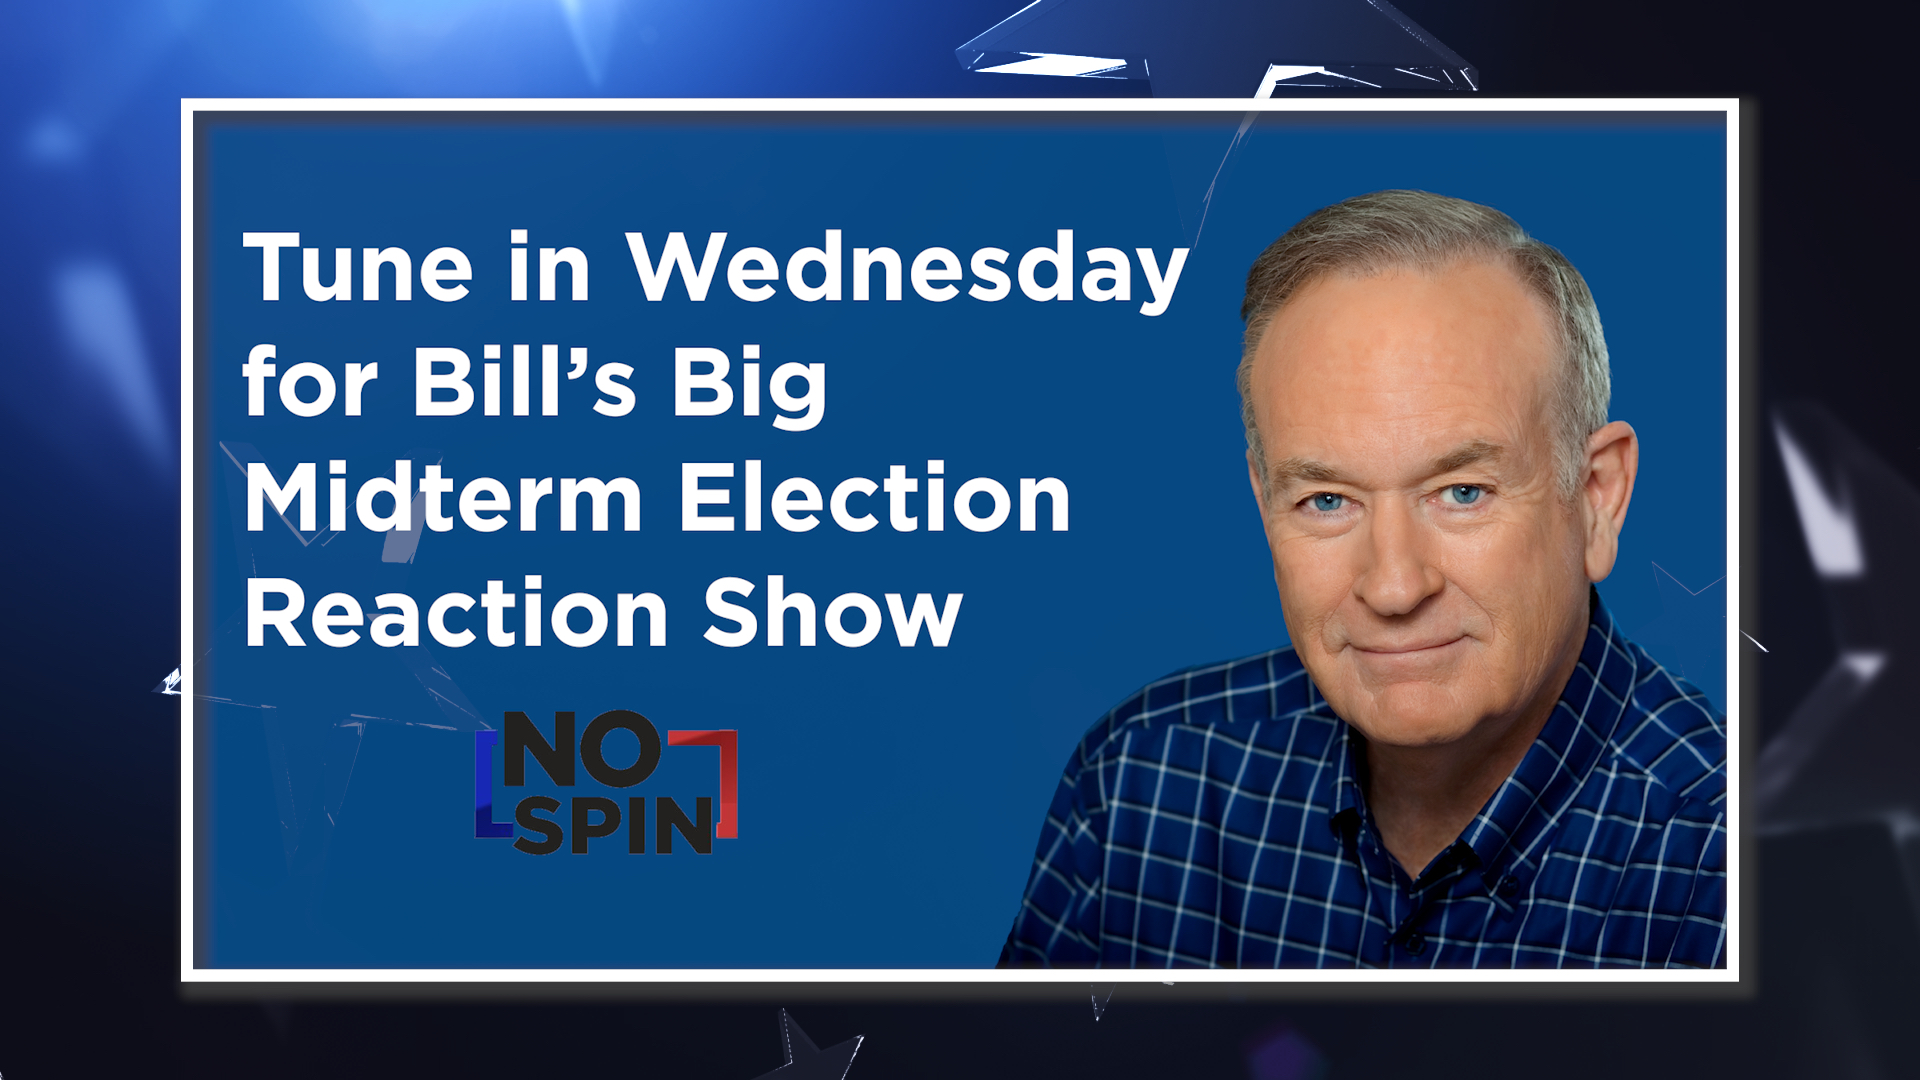 Tune in Wednesday for Bill's Big Midterm Election Reaction Show